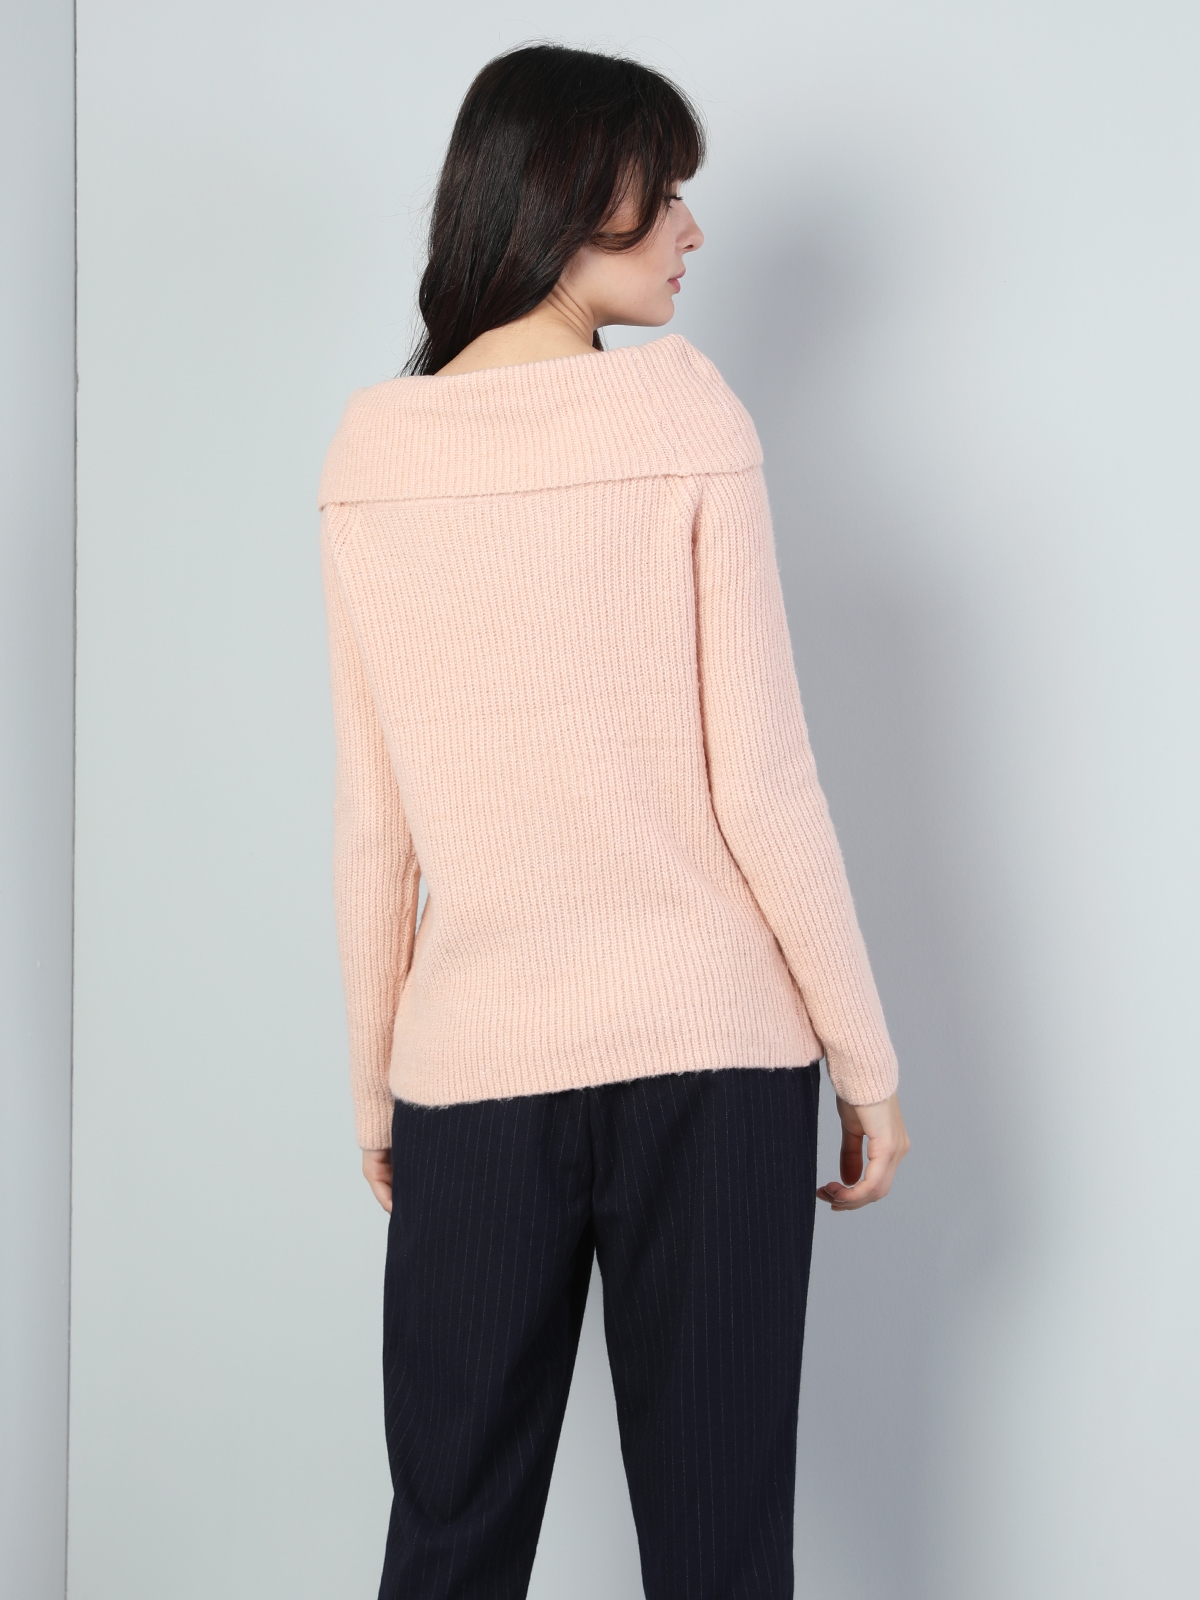 Colins Pınk Woman Sweaters. 2